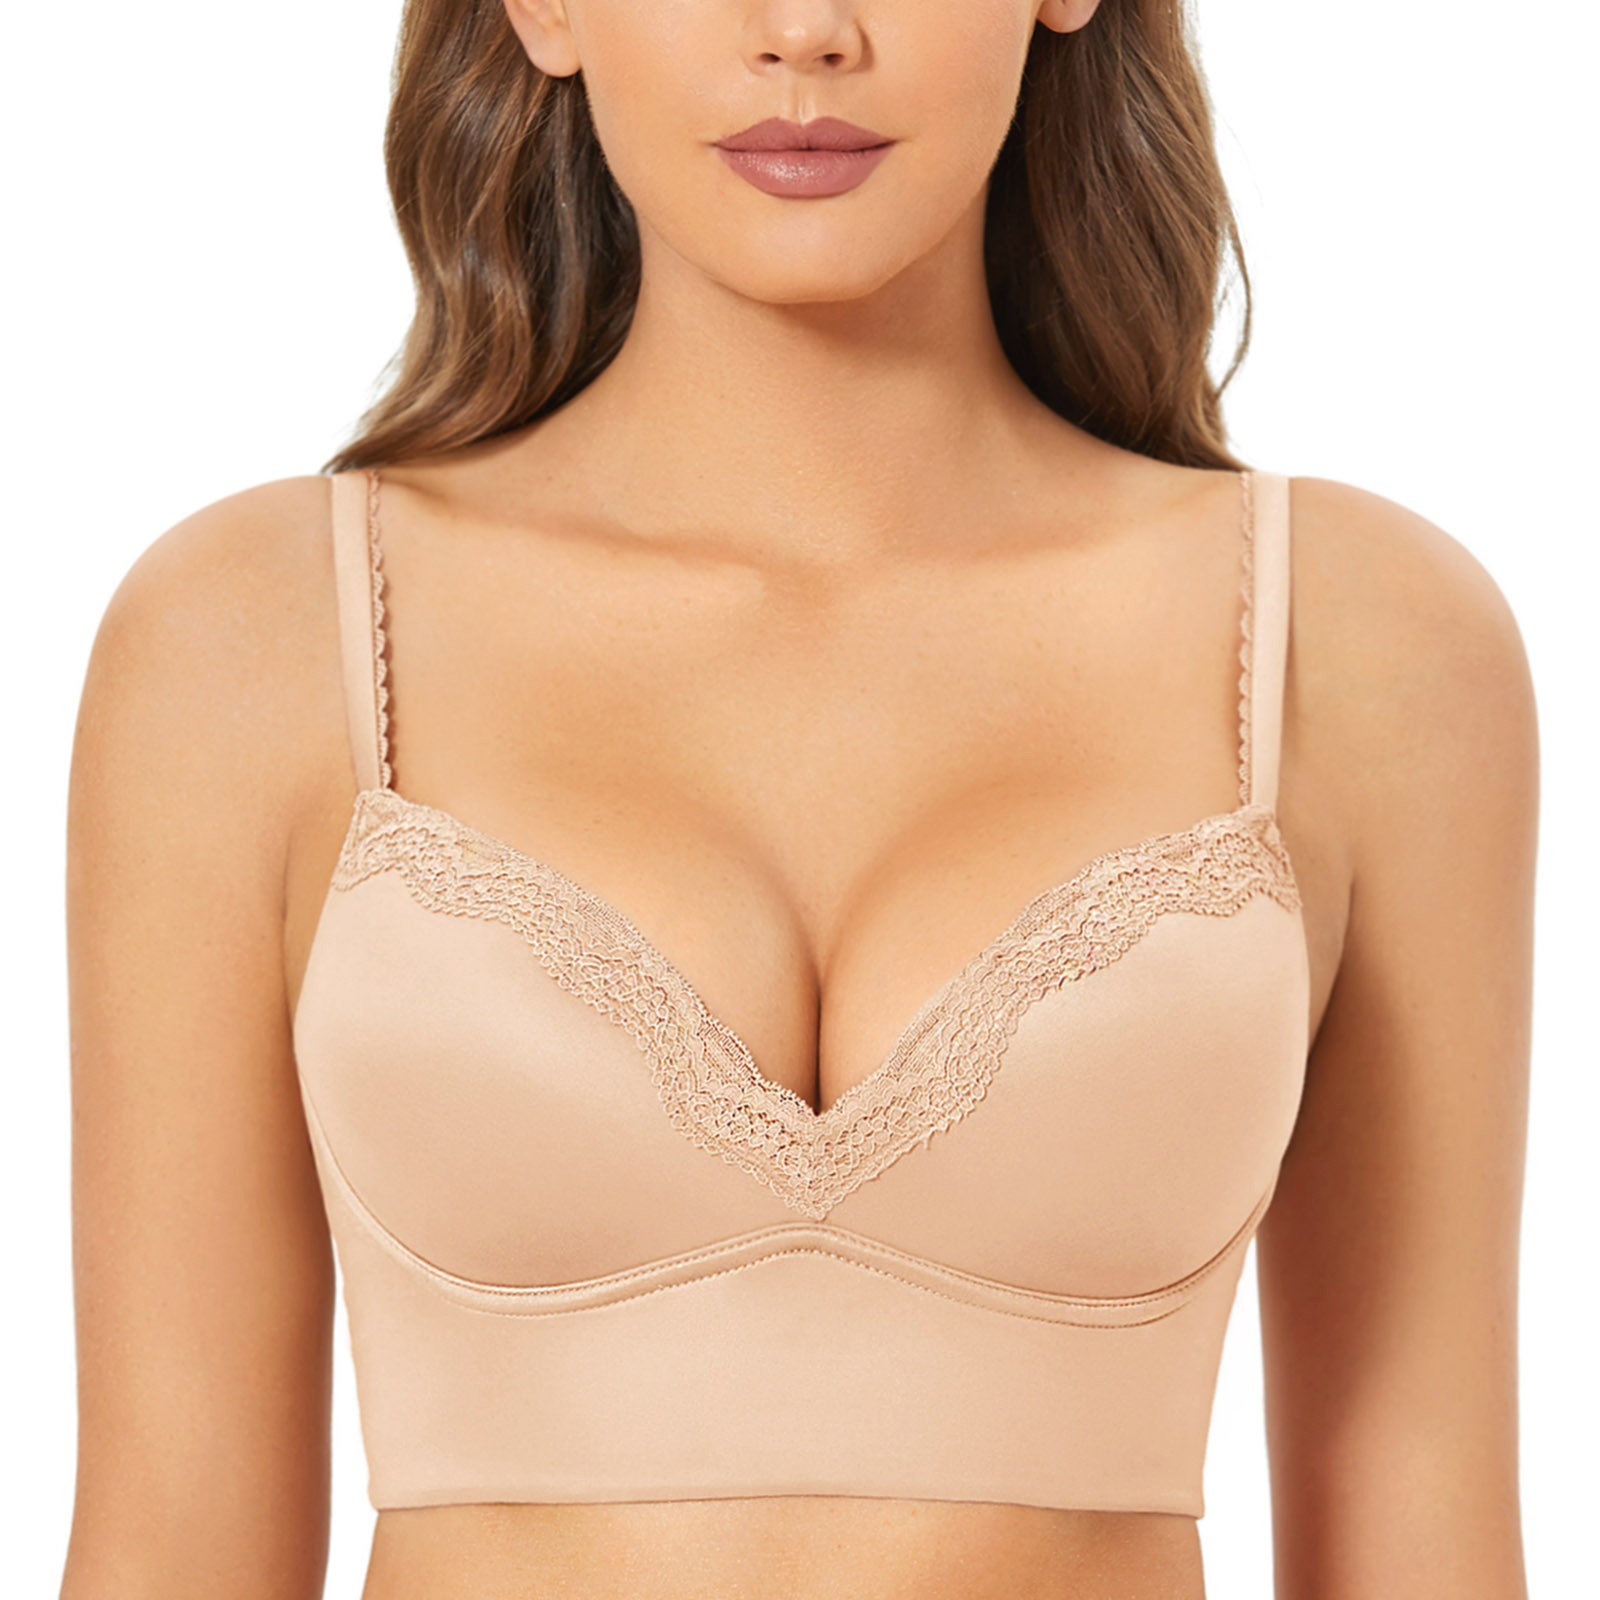 Buy DKNY Hot Pink Logo Wirefree Push Up Bra from the Next UK